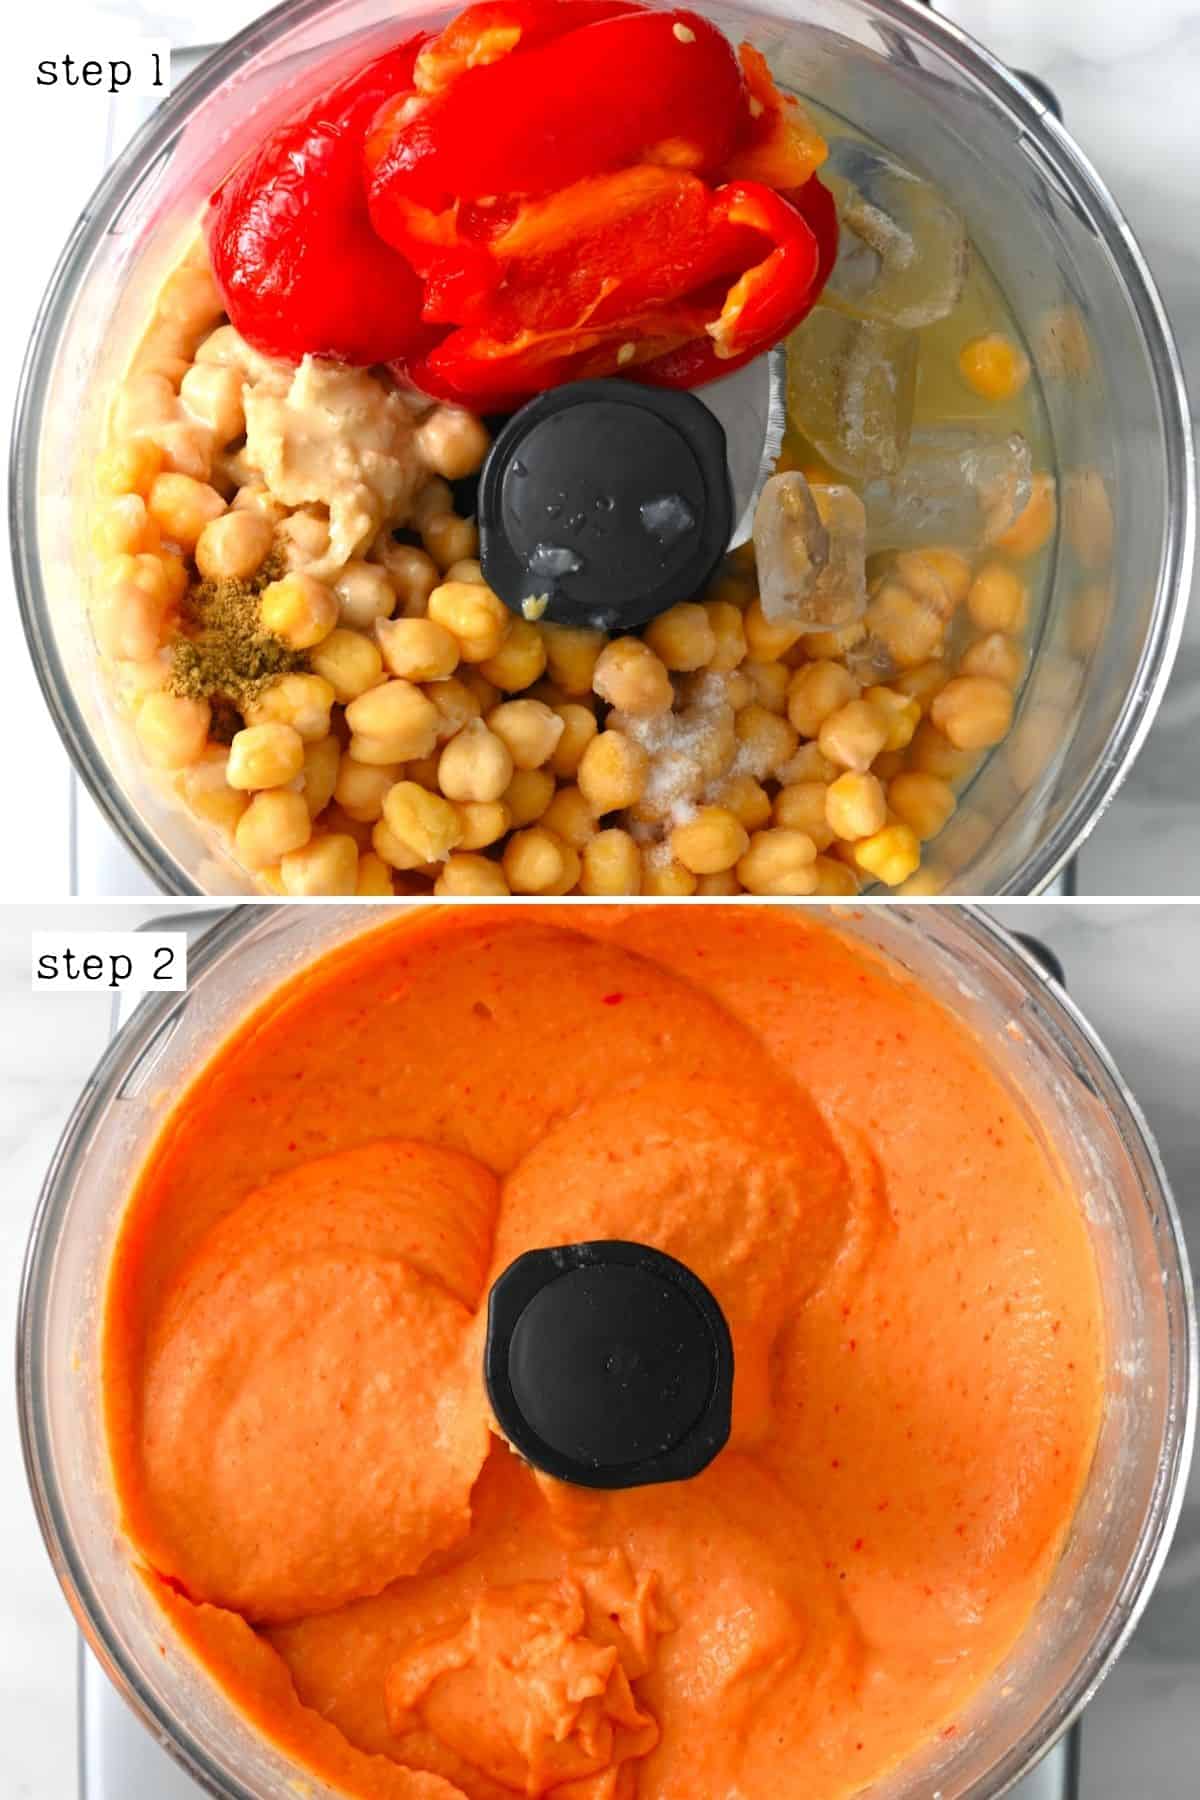 Steps for making roasted red pepper hummus